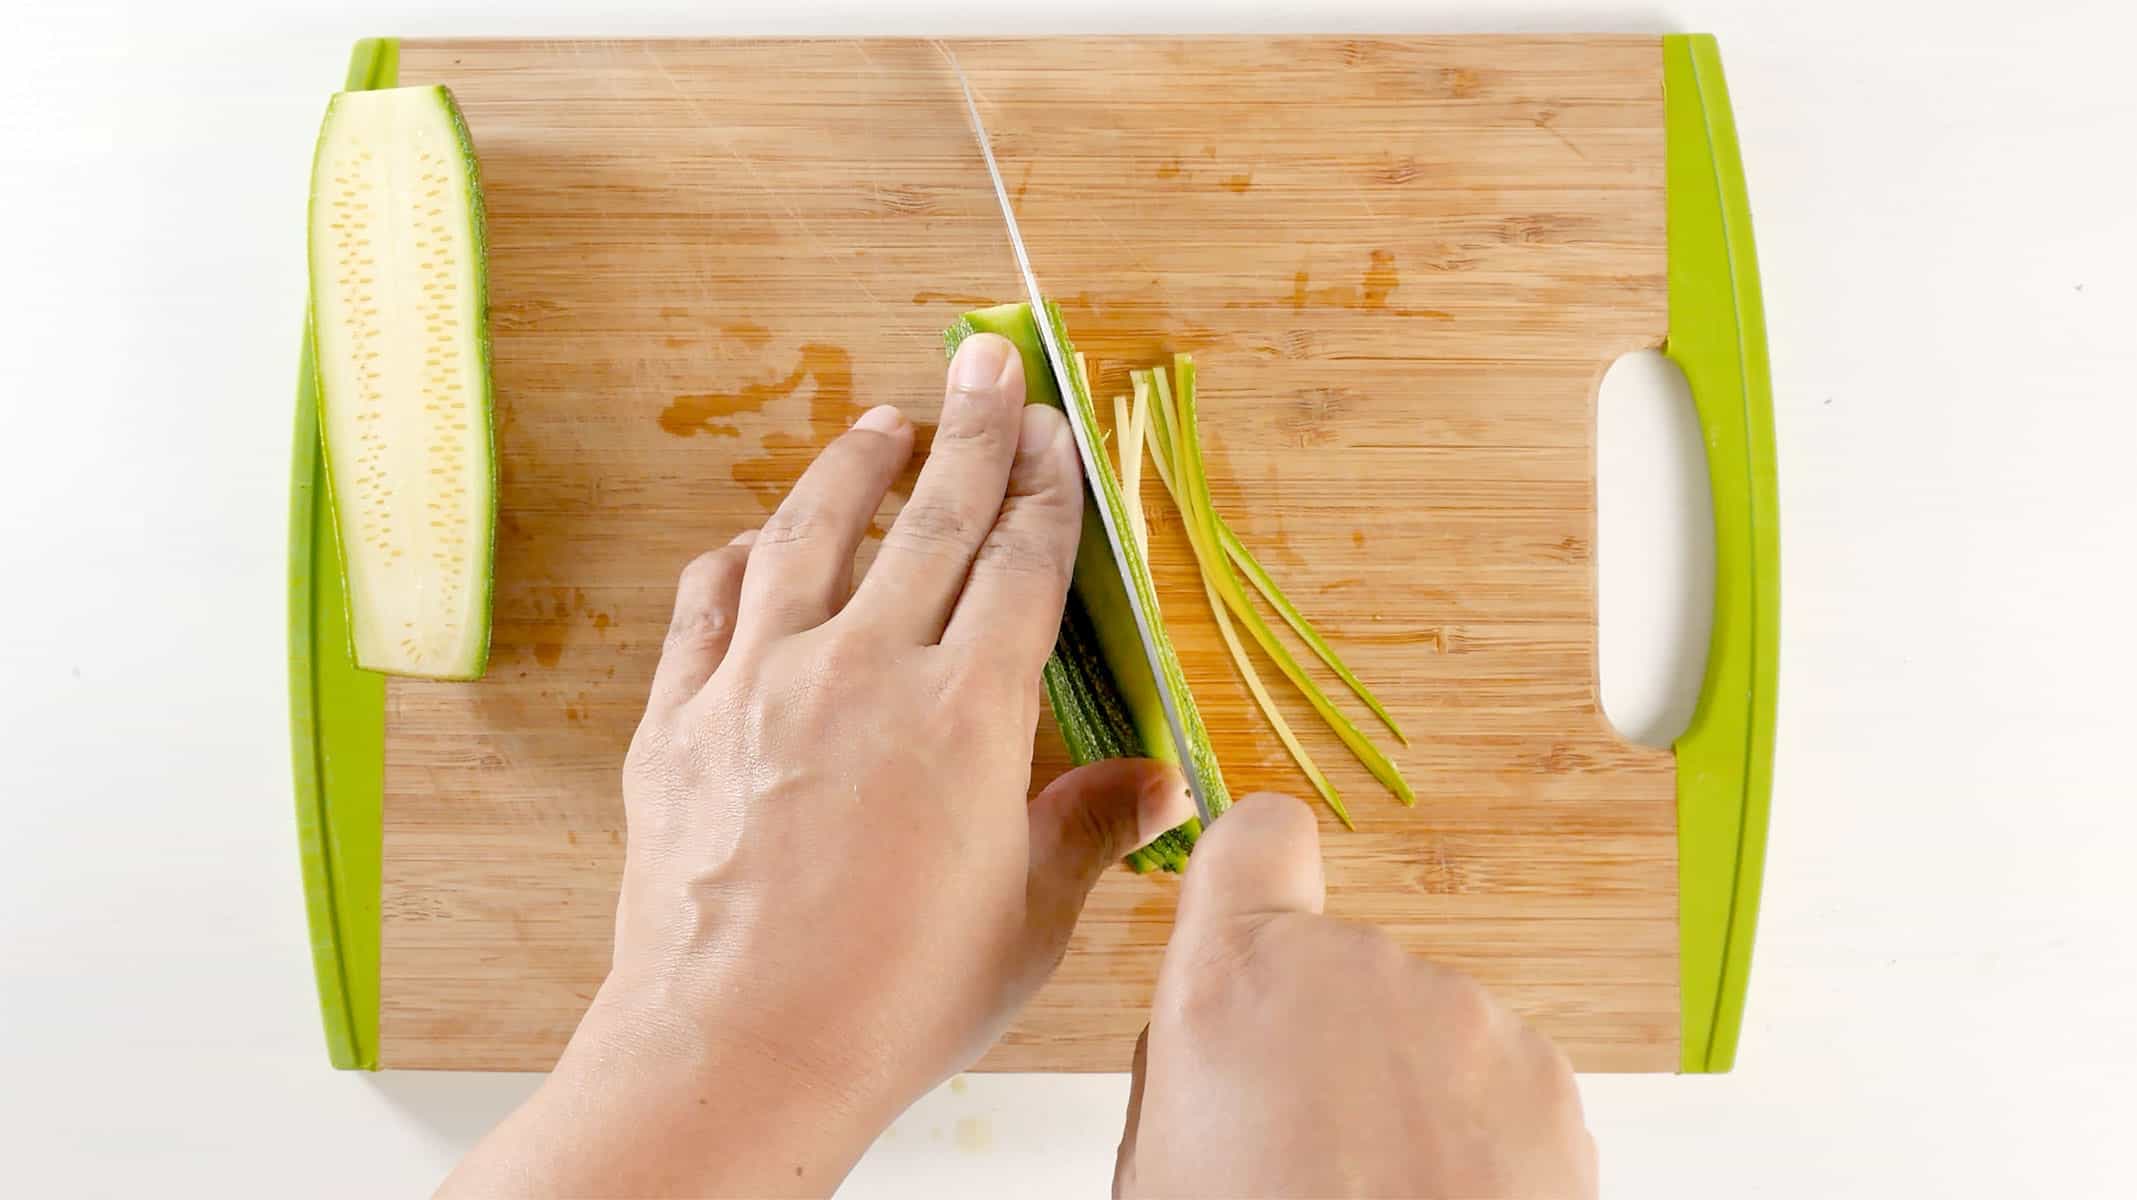 Cutting zoodles with knife.